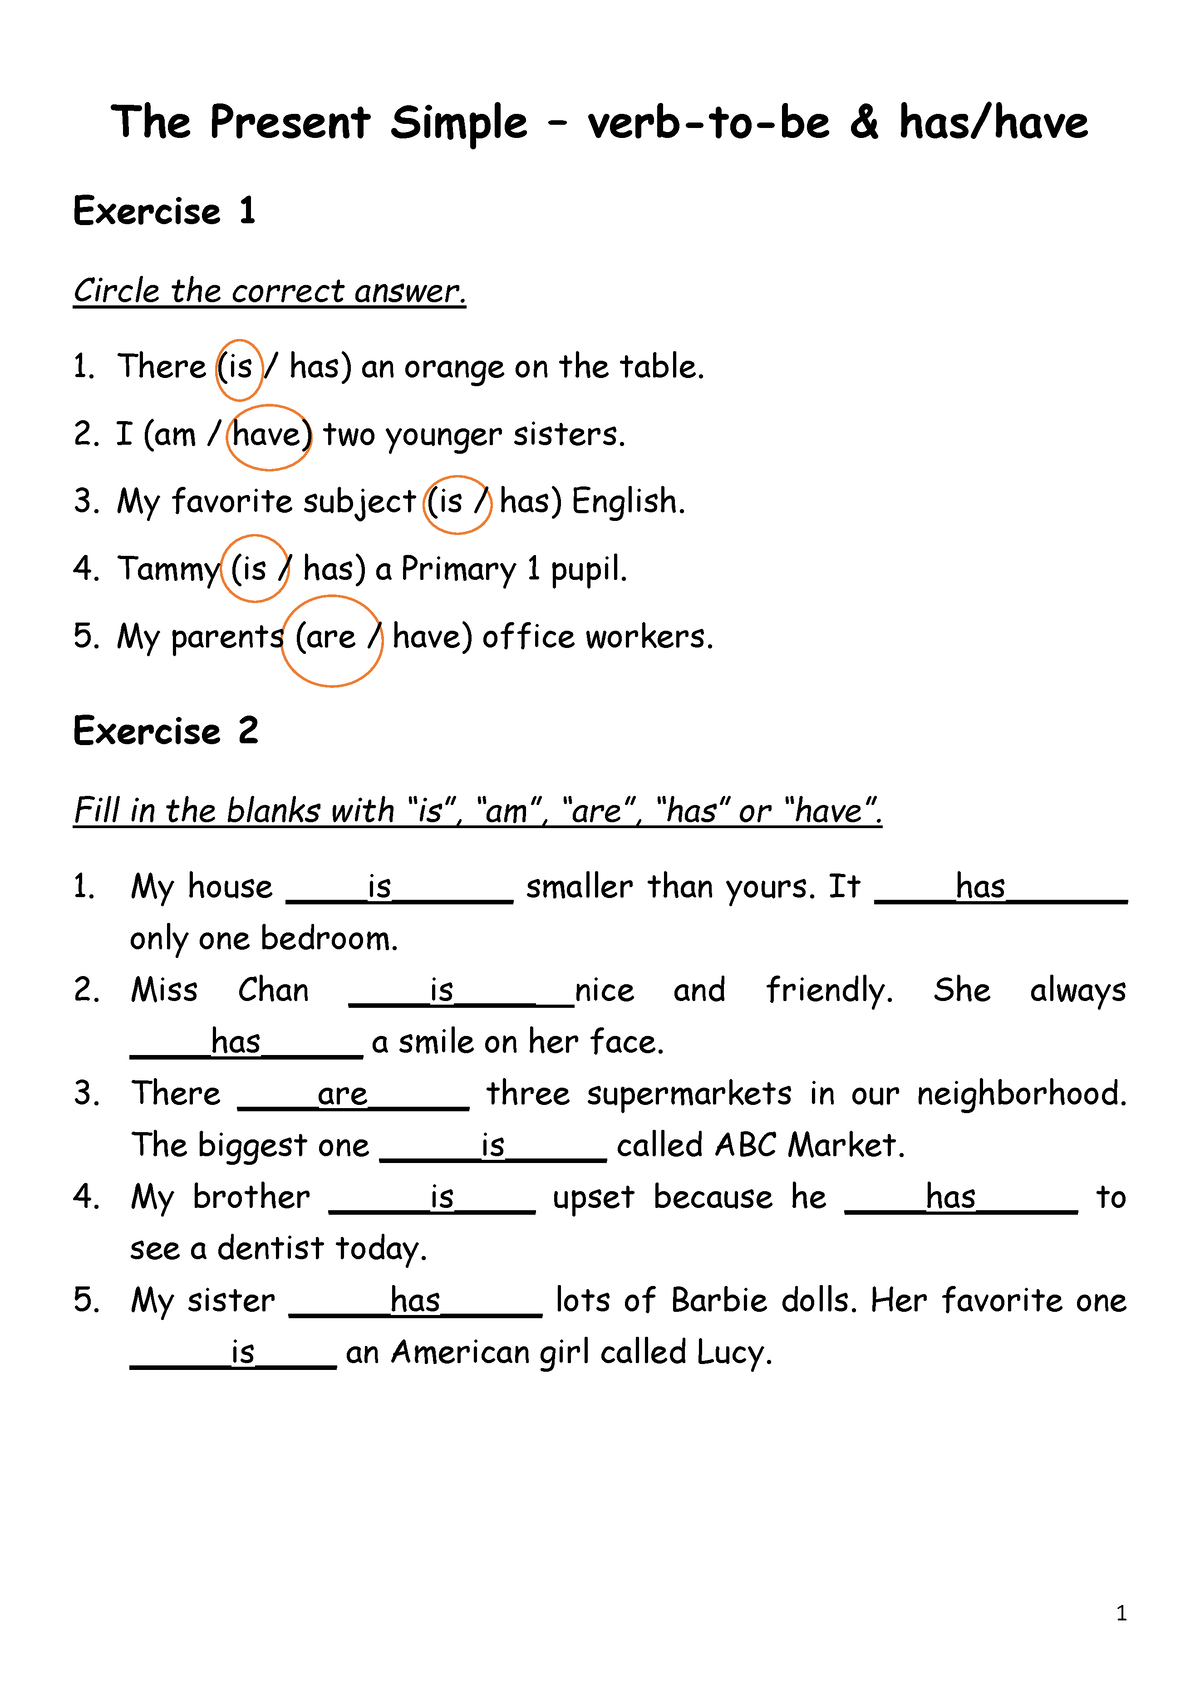 homework-2-ingles-1-the-present-simple-verb-to-be-has-have-exercise-1-circle-the-correct